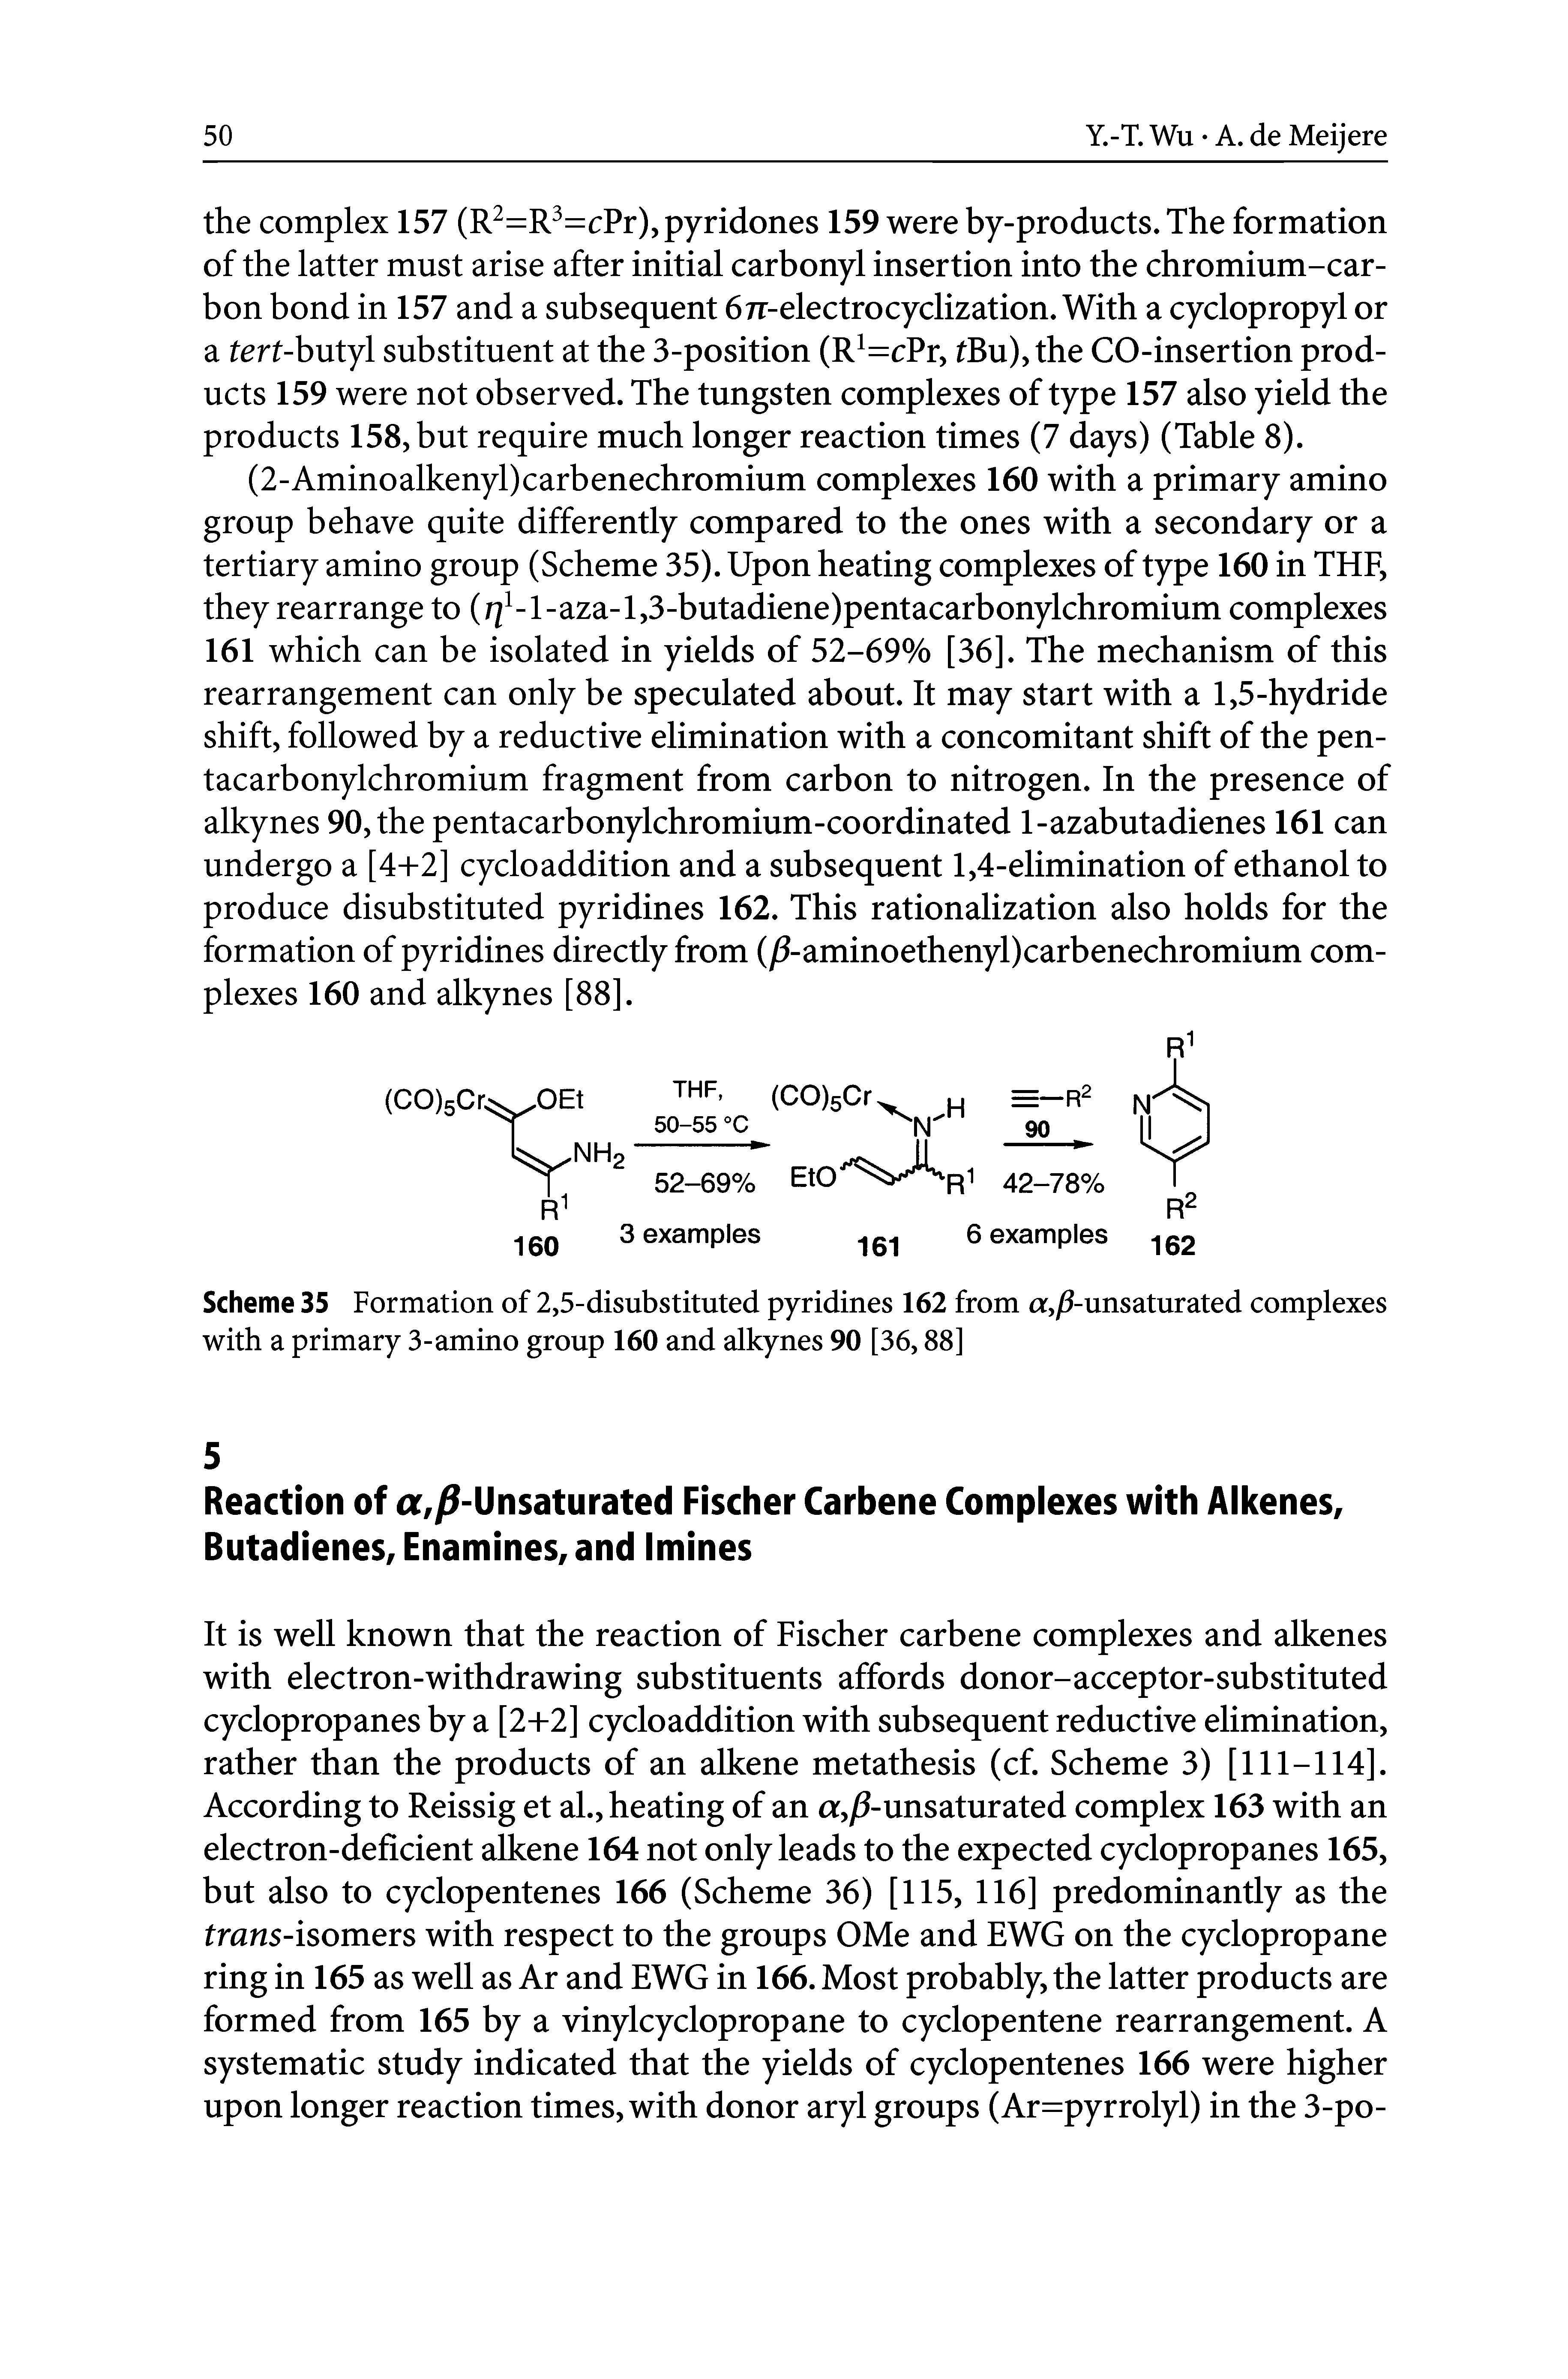 Scheme 35 Formation of 2,5-disubstituted pyridines 162 from a,/ -unsaturated complexes with a primary 3-amino group 160 and alkynes 90 [36,88]...